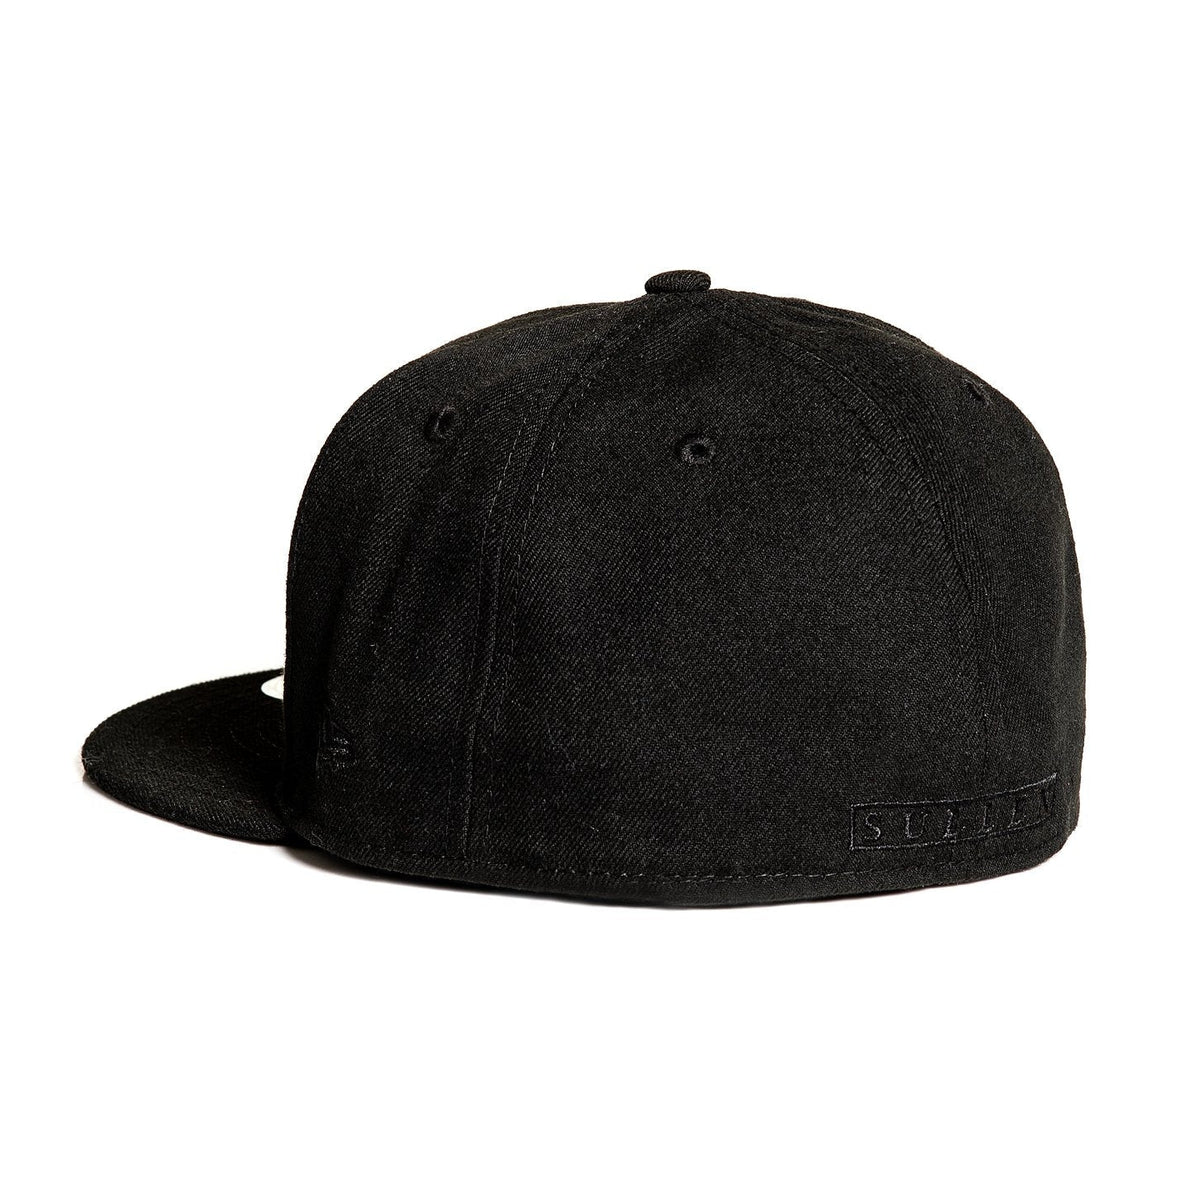 Sullen Badge Eternal Black Stretched Fitted Cap-Mens Beanies, Hats &amp; Snapback Caps-Scarlett Dawn